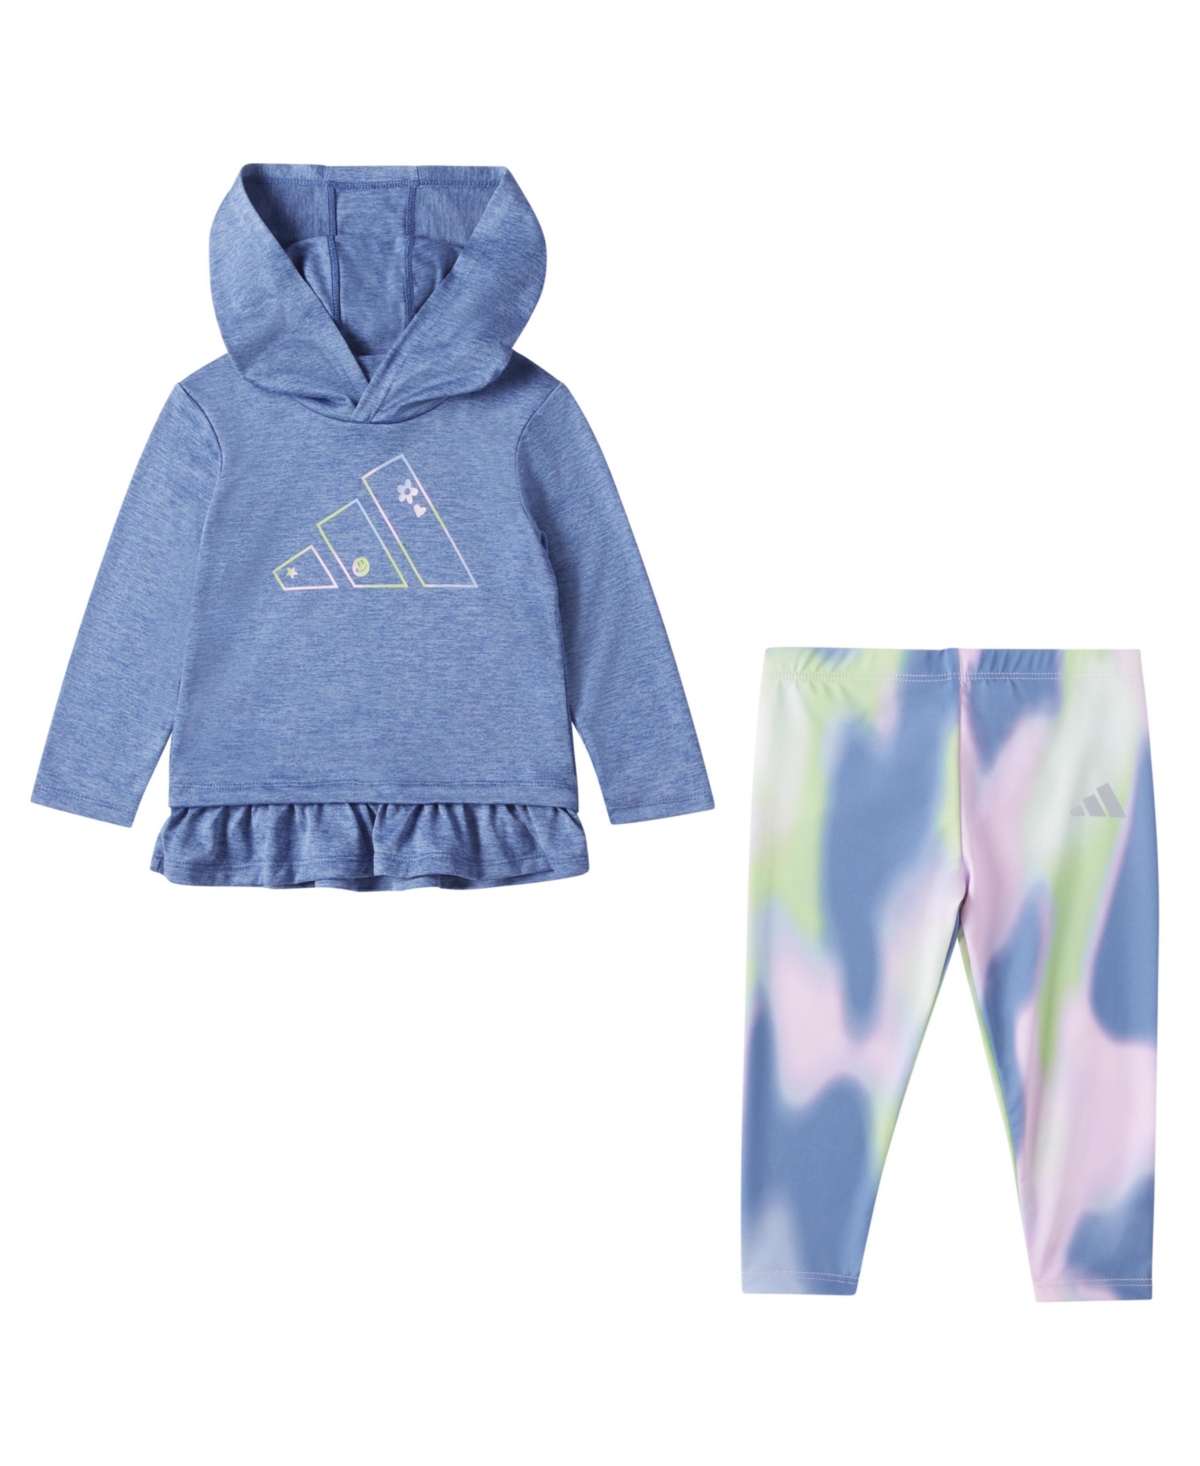 Adidas Originals Baby Girls Hooded T Shirt And Printed Leggings, 2 Piece Set In Crew Blue